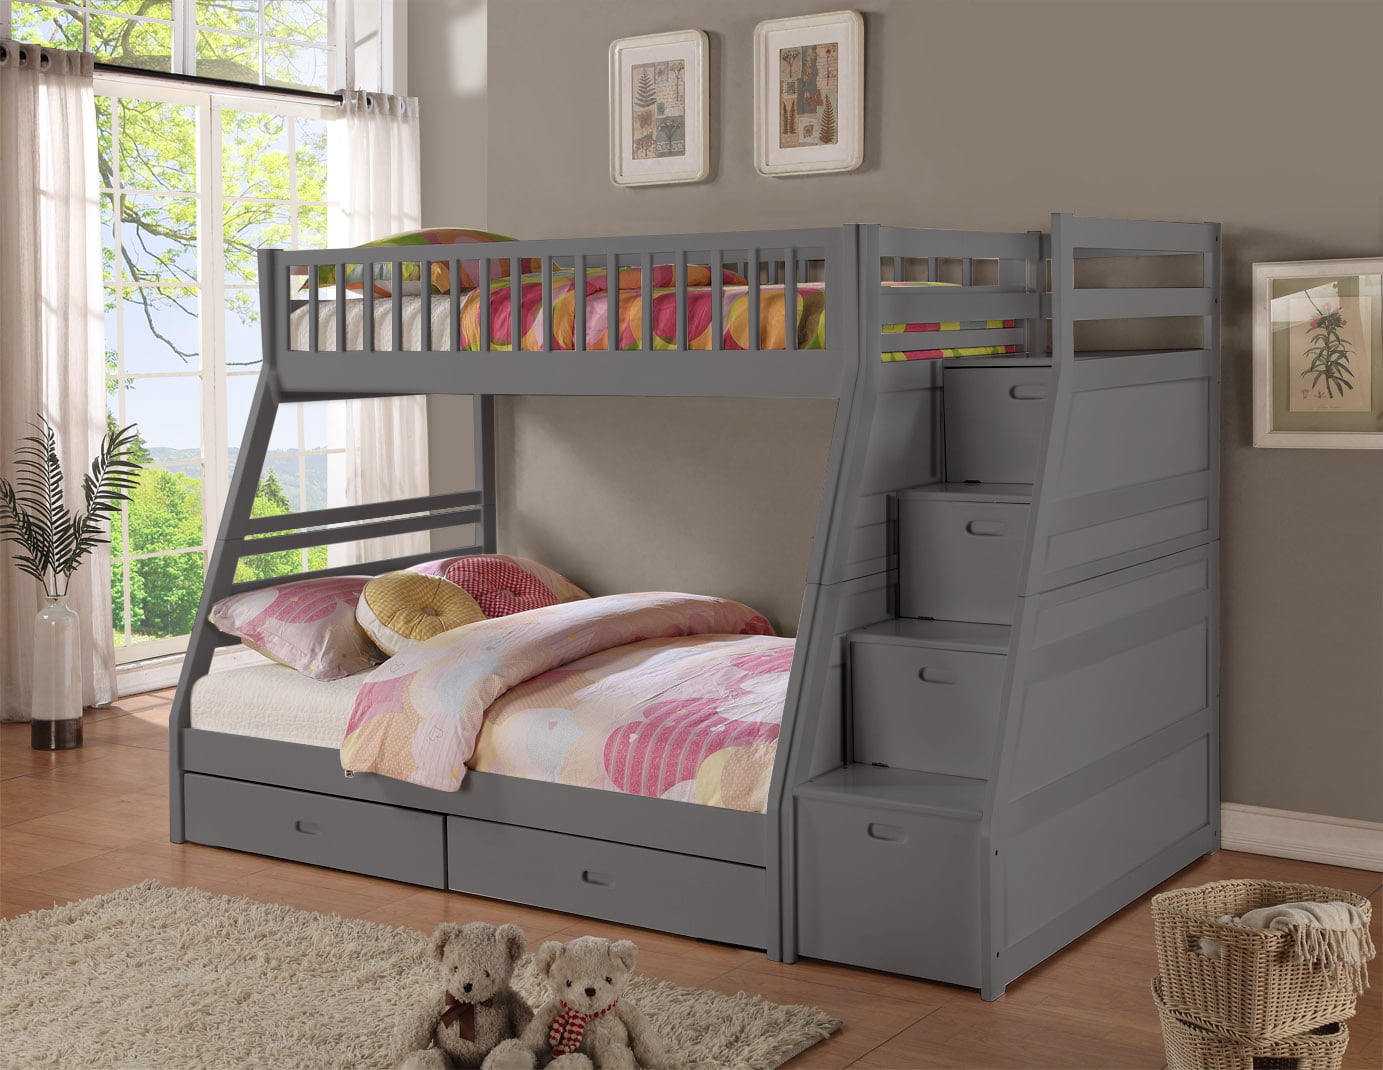 Darla Twin Over Full Staircase Bunk Bed, Twin Over Full Bunk Bed With Stair Storage Drawers